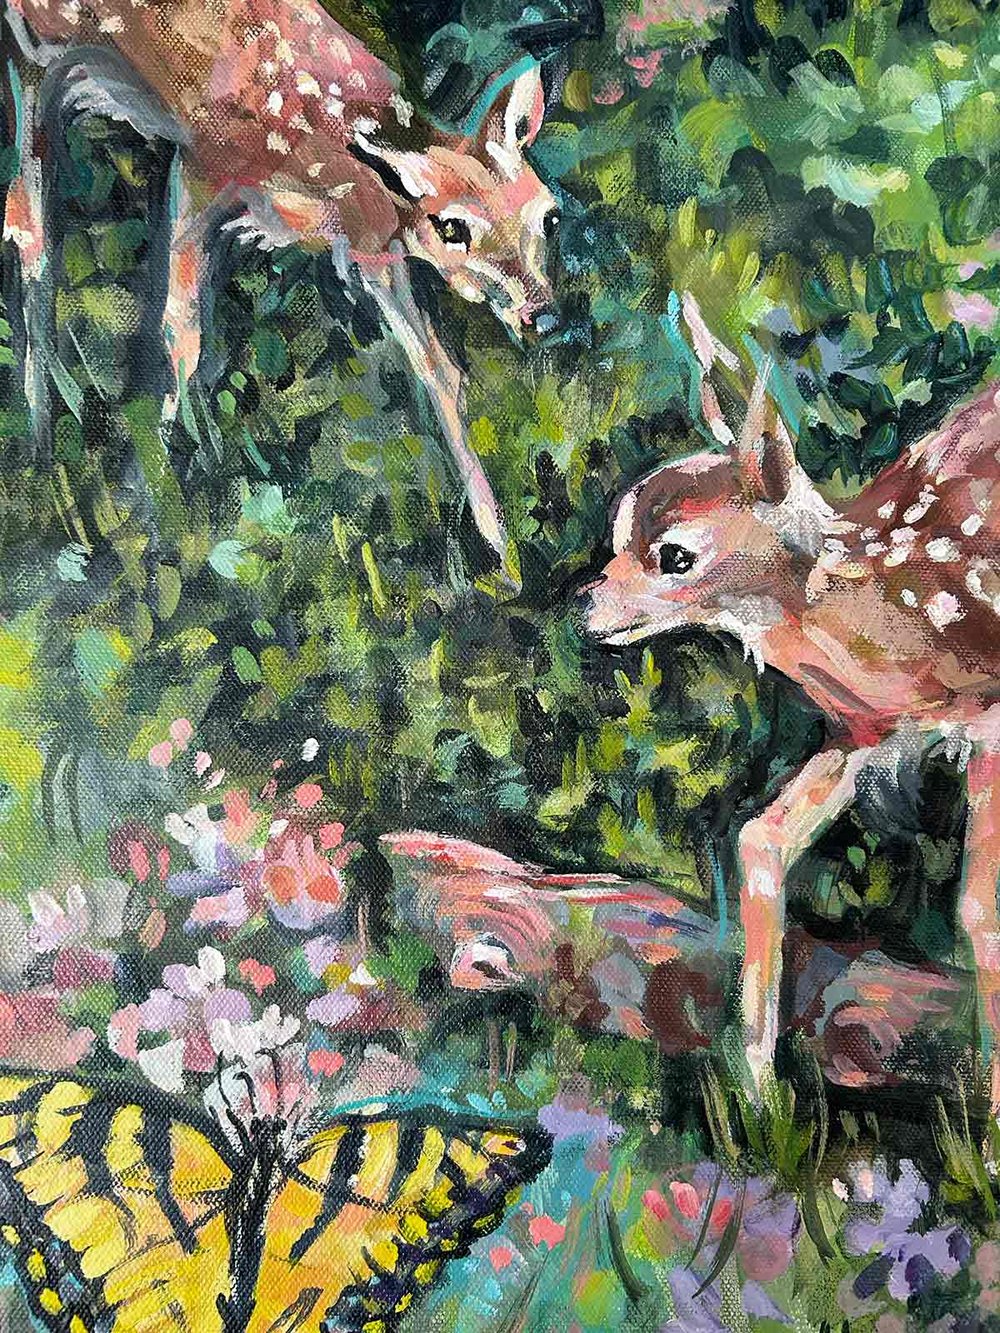 Where the Forest Edge Begins – fawn deer painting, framed